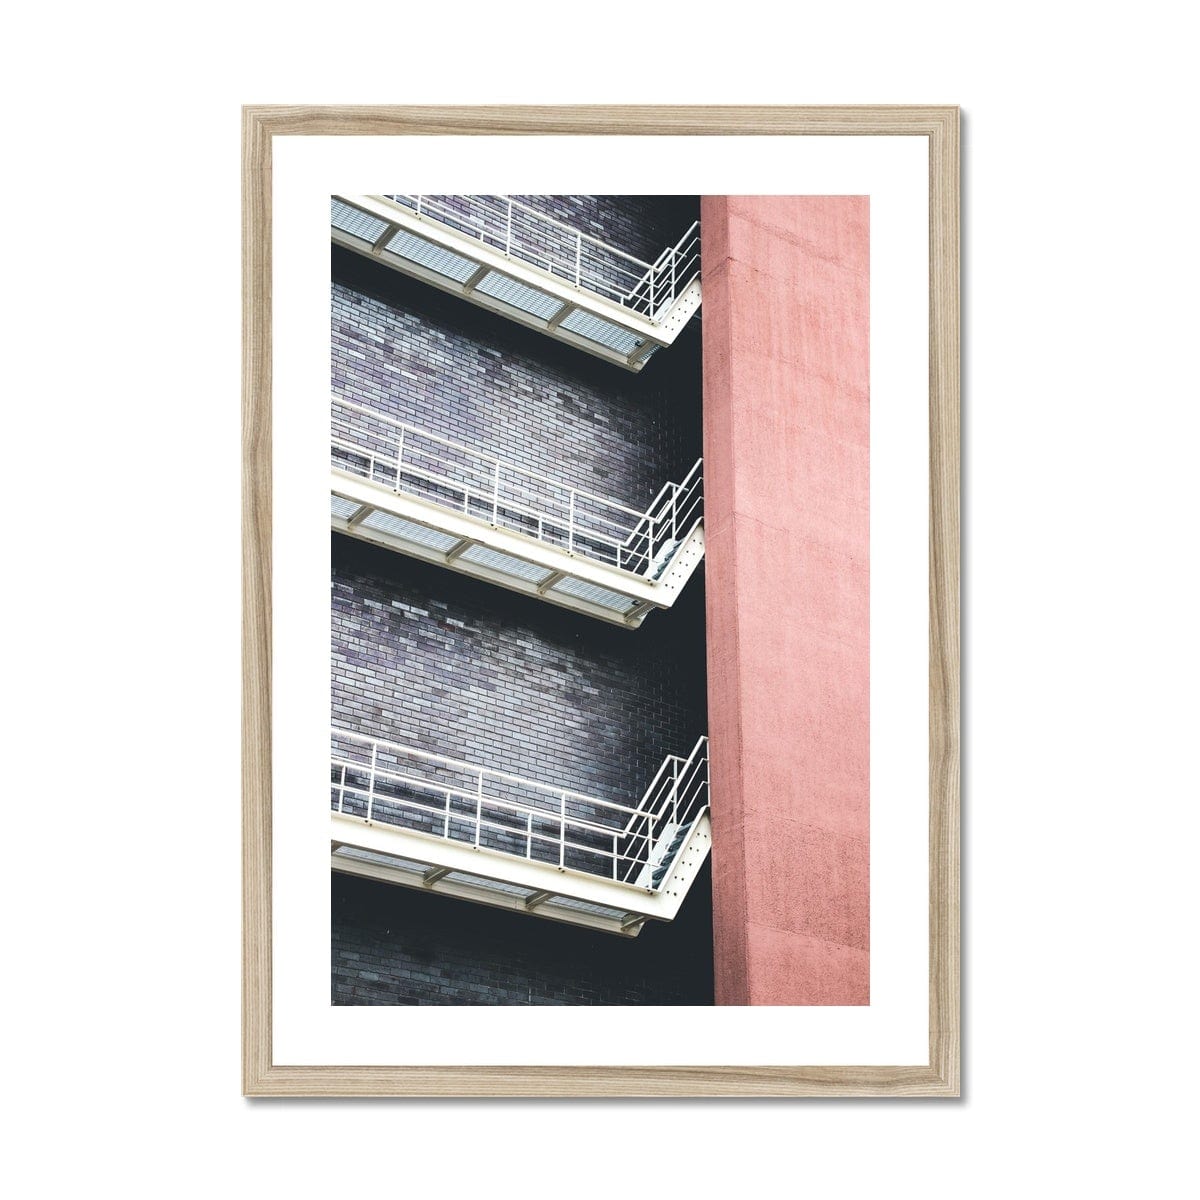 Adam Davies Framed 6"x8" / Natural Frame The Way Out Architecture Abstract Framed Print